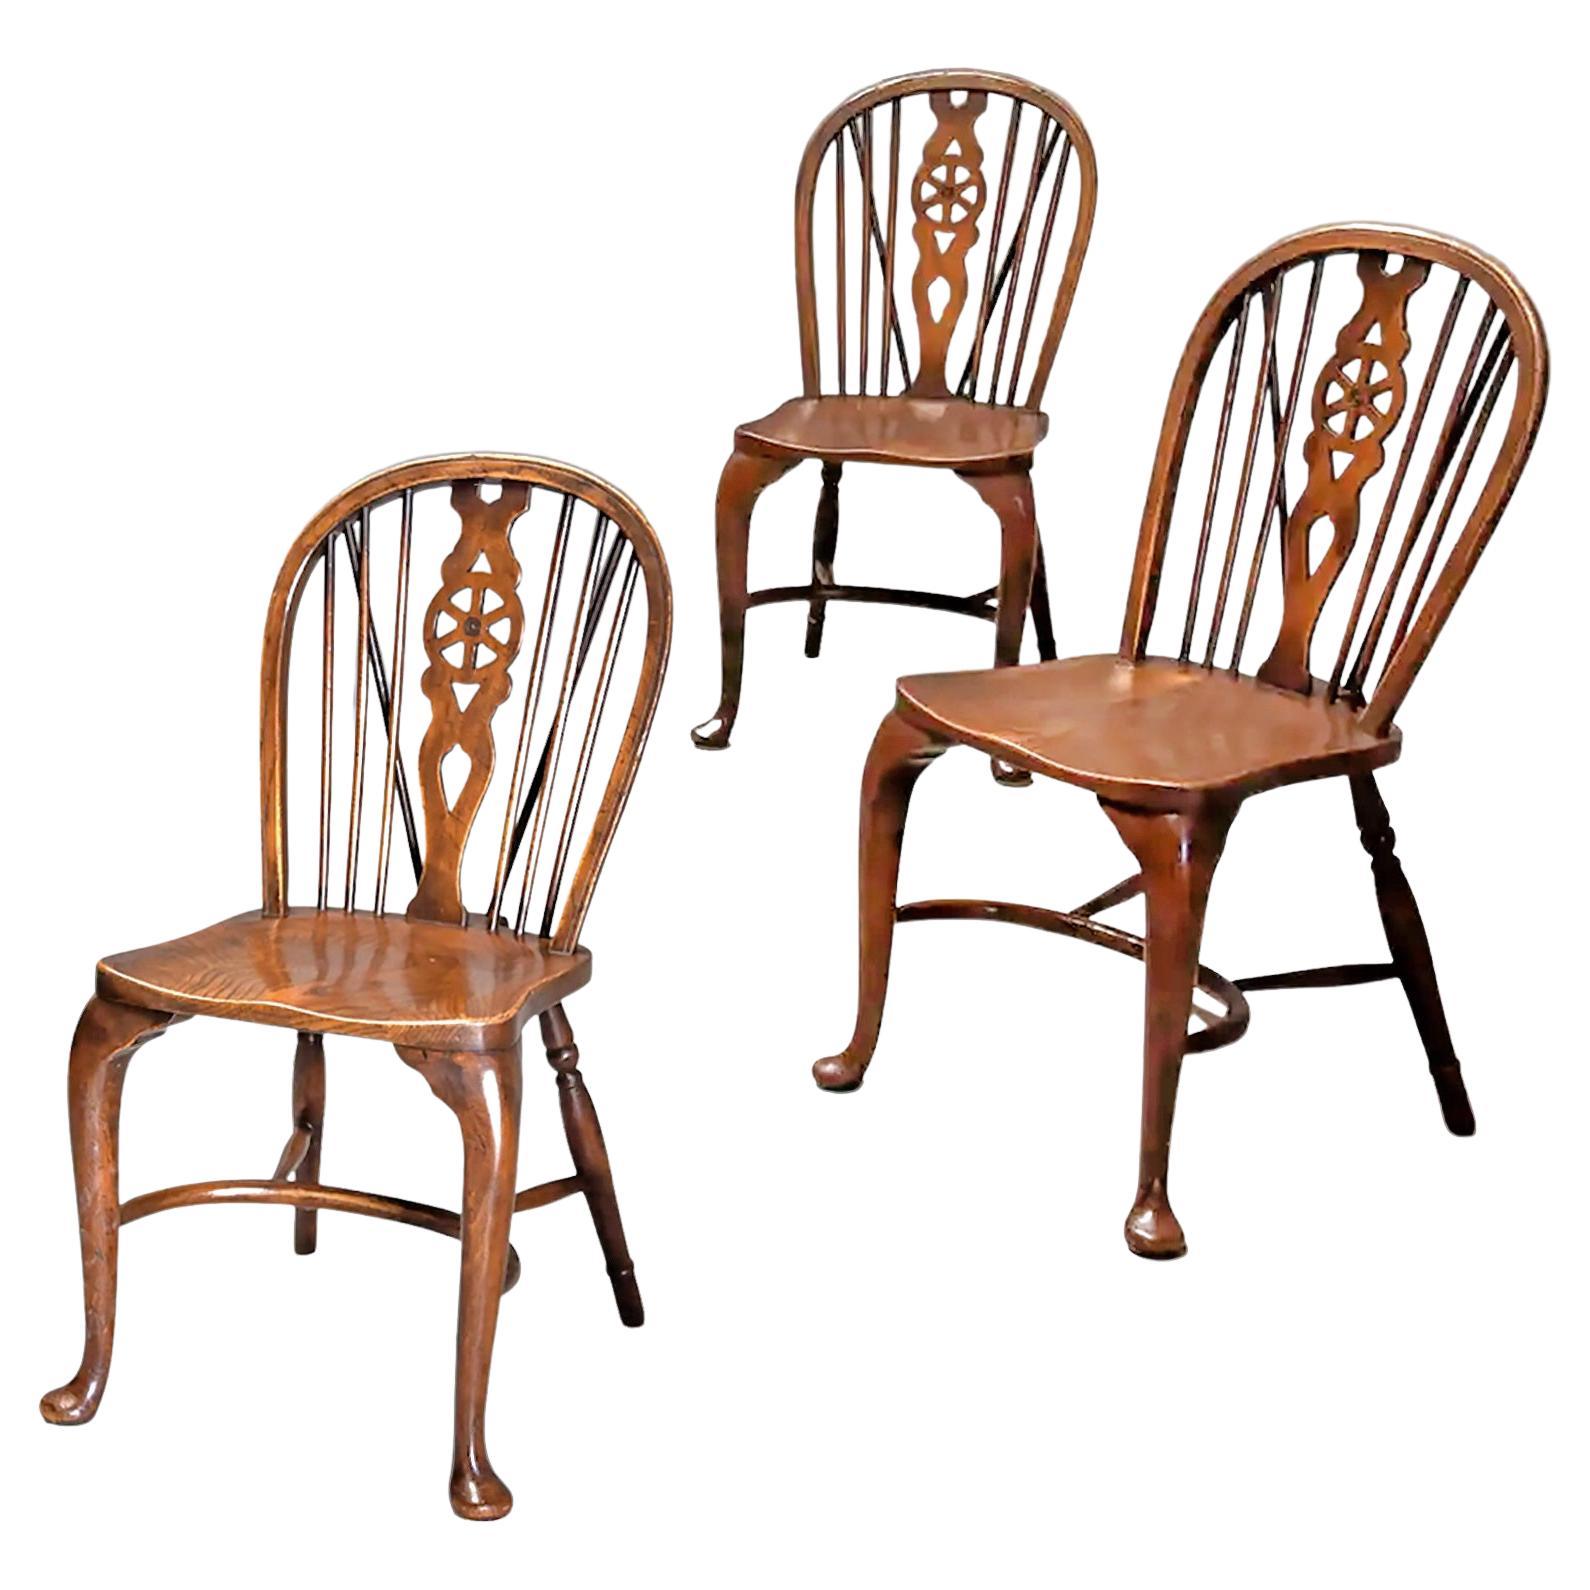 Set of Three Ash and Beech Wheelback Windsor Chairs with Cabriole Leg, England